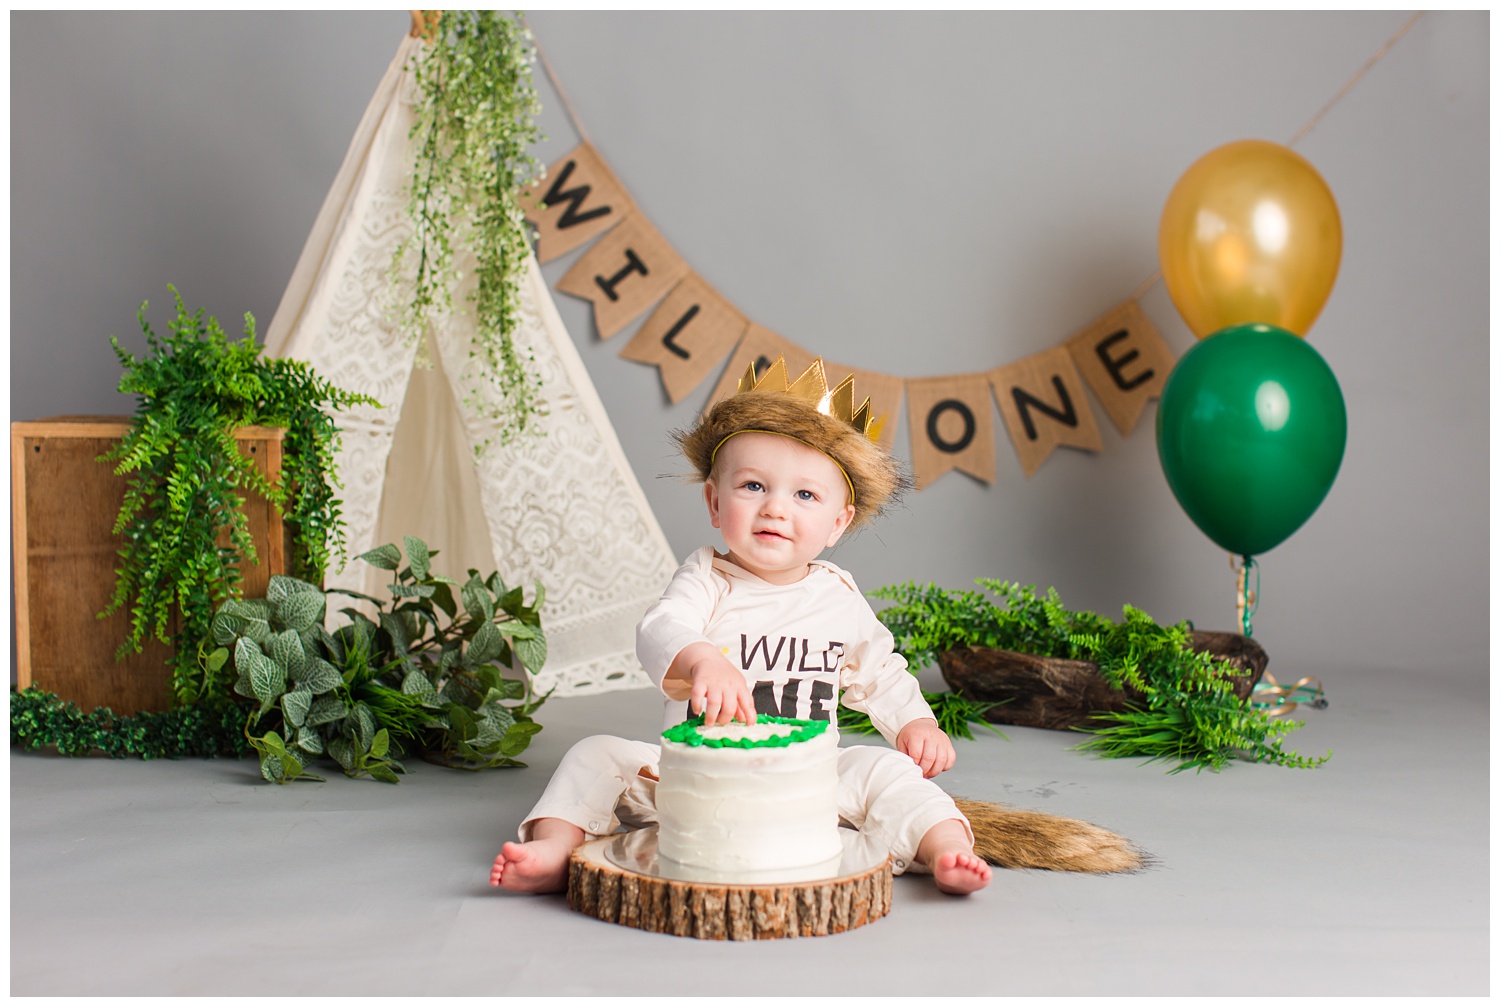 Baby Cullen poses for Where The Wild Things Are themed cake smash photoshoot.